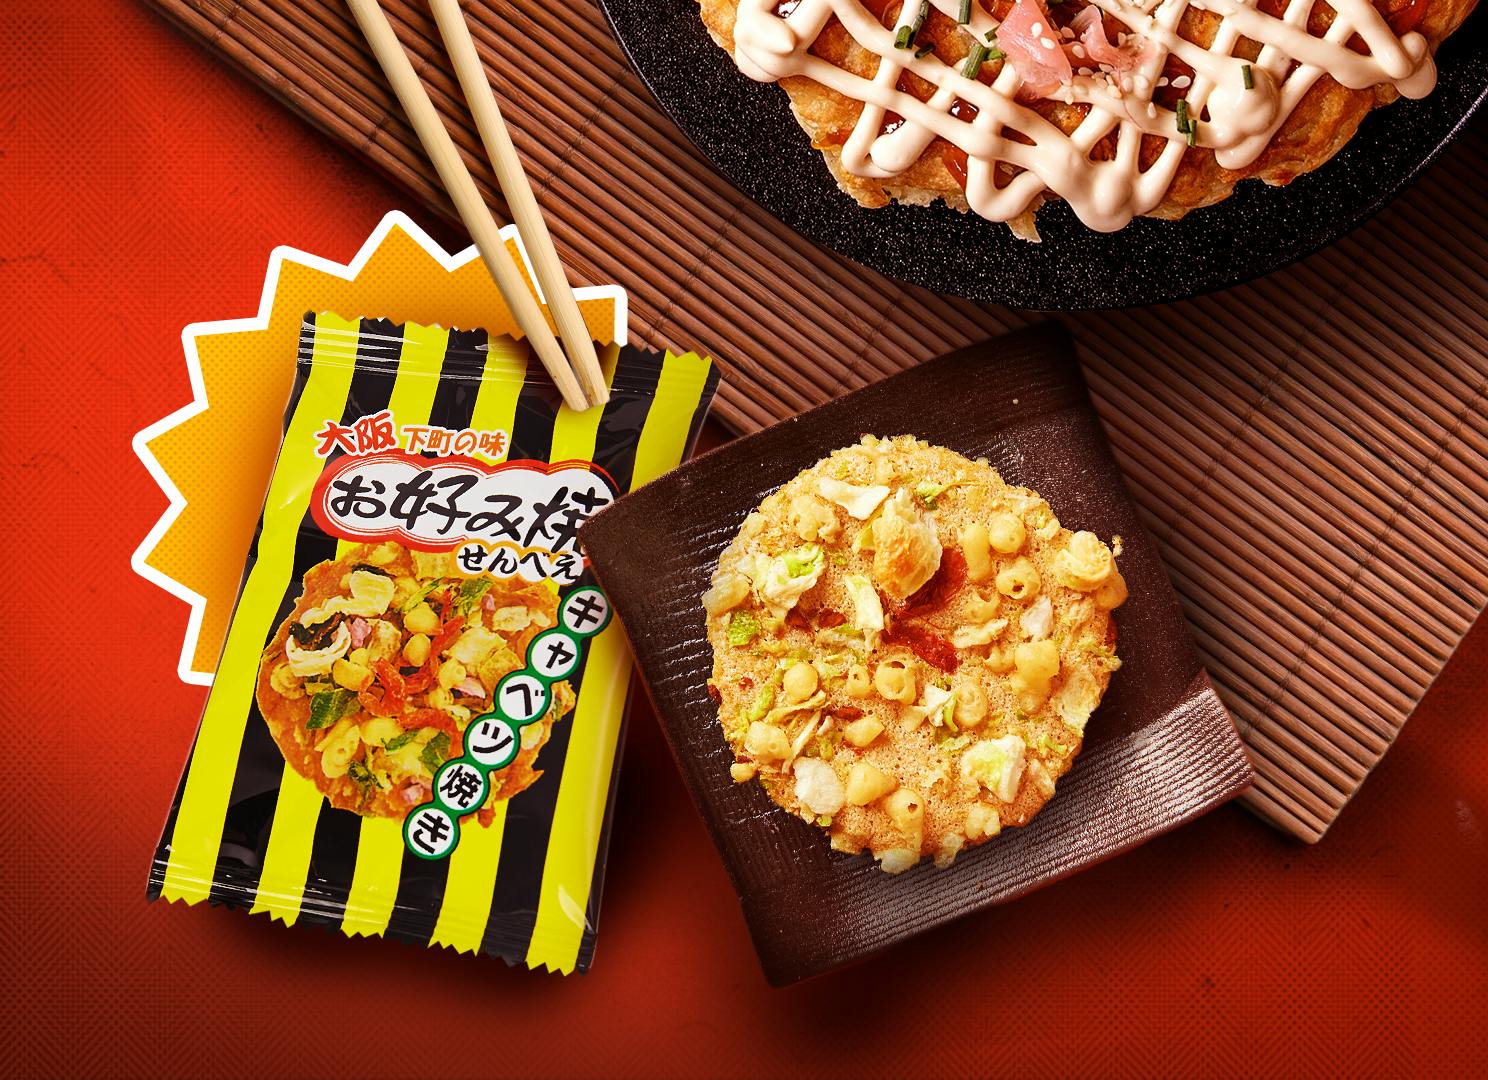 A small senbei topped with okonomiyaki toppings sits on a plate next to its yellow packaging